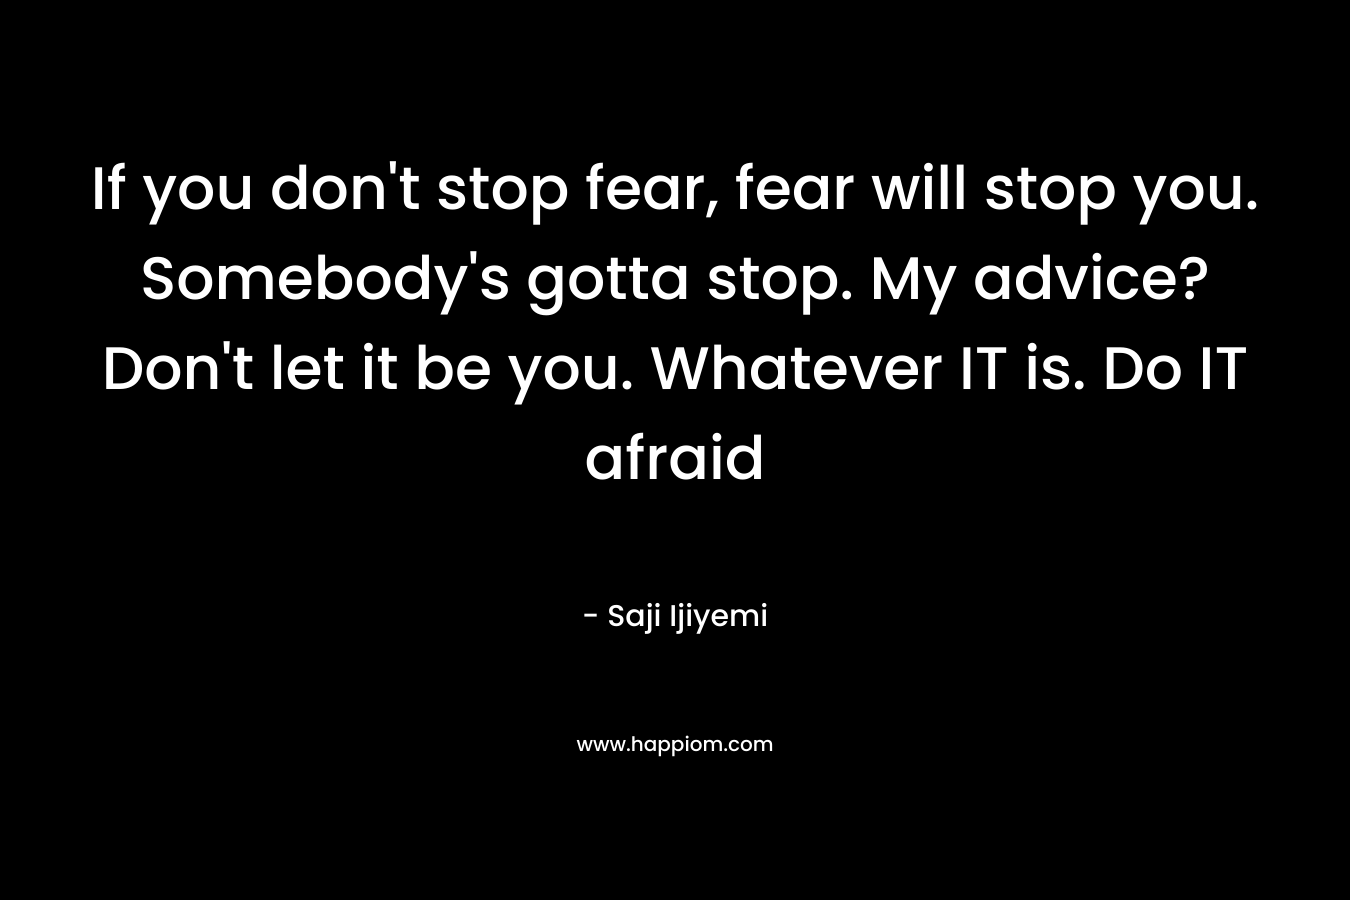 If you don't stop fear, fear will stop you. Somebody's gotta stop. My advice? Don't let it be you. Whatever IT is. Do IT afraid